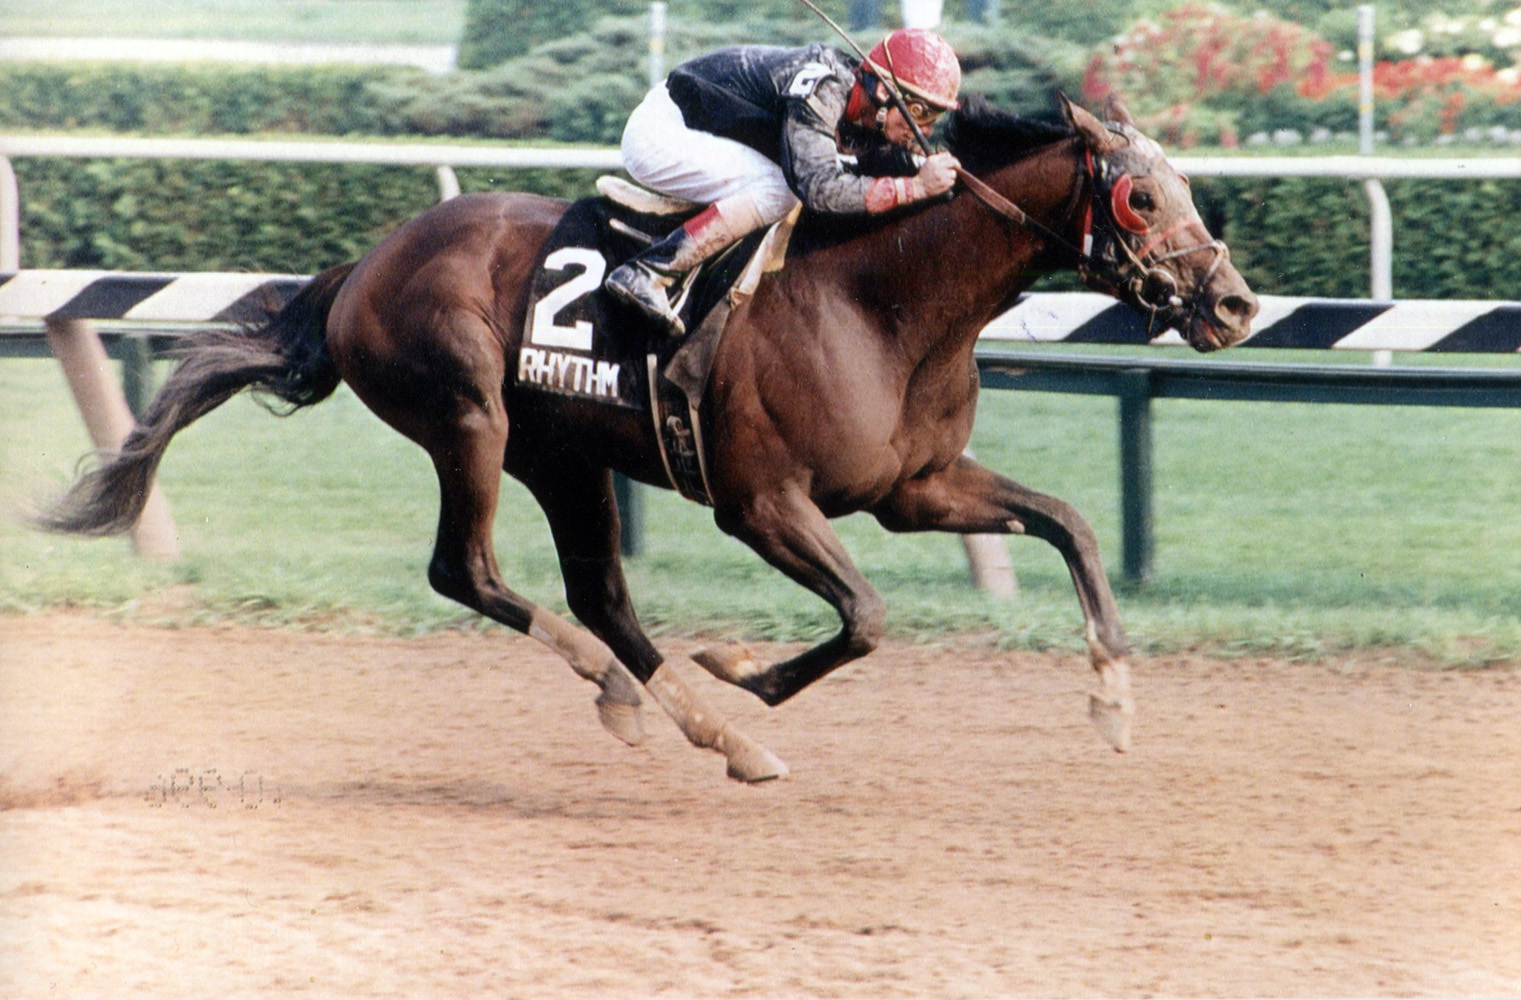 Craig Perret and Rhythm winning the 1990 Travers Stakes at Saratoga (Mike Pender/Museum Collection)